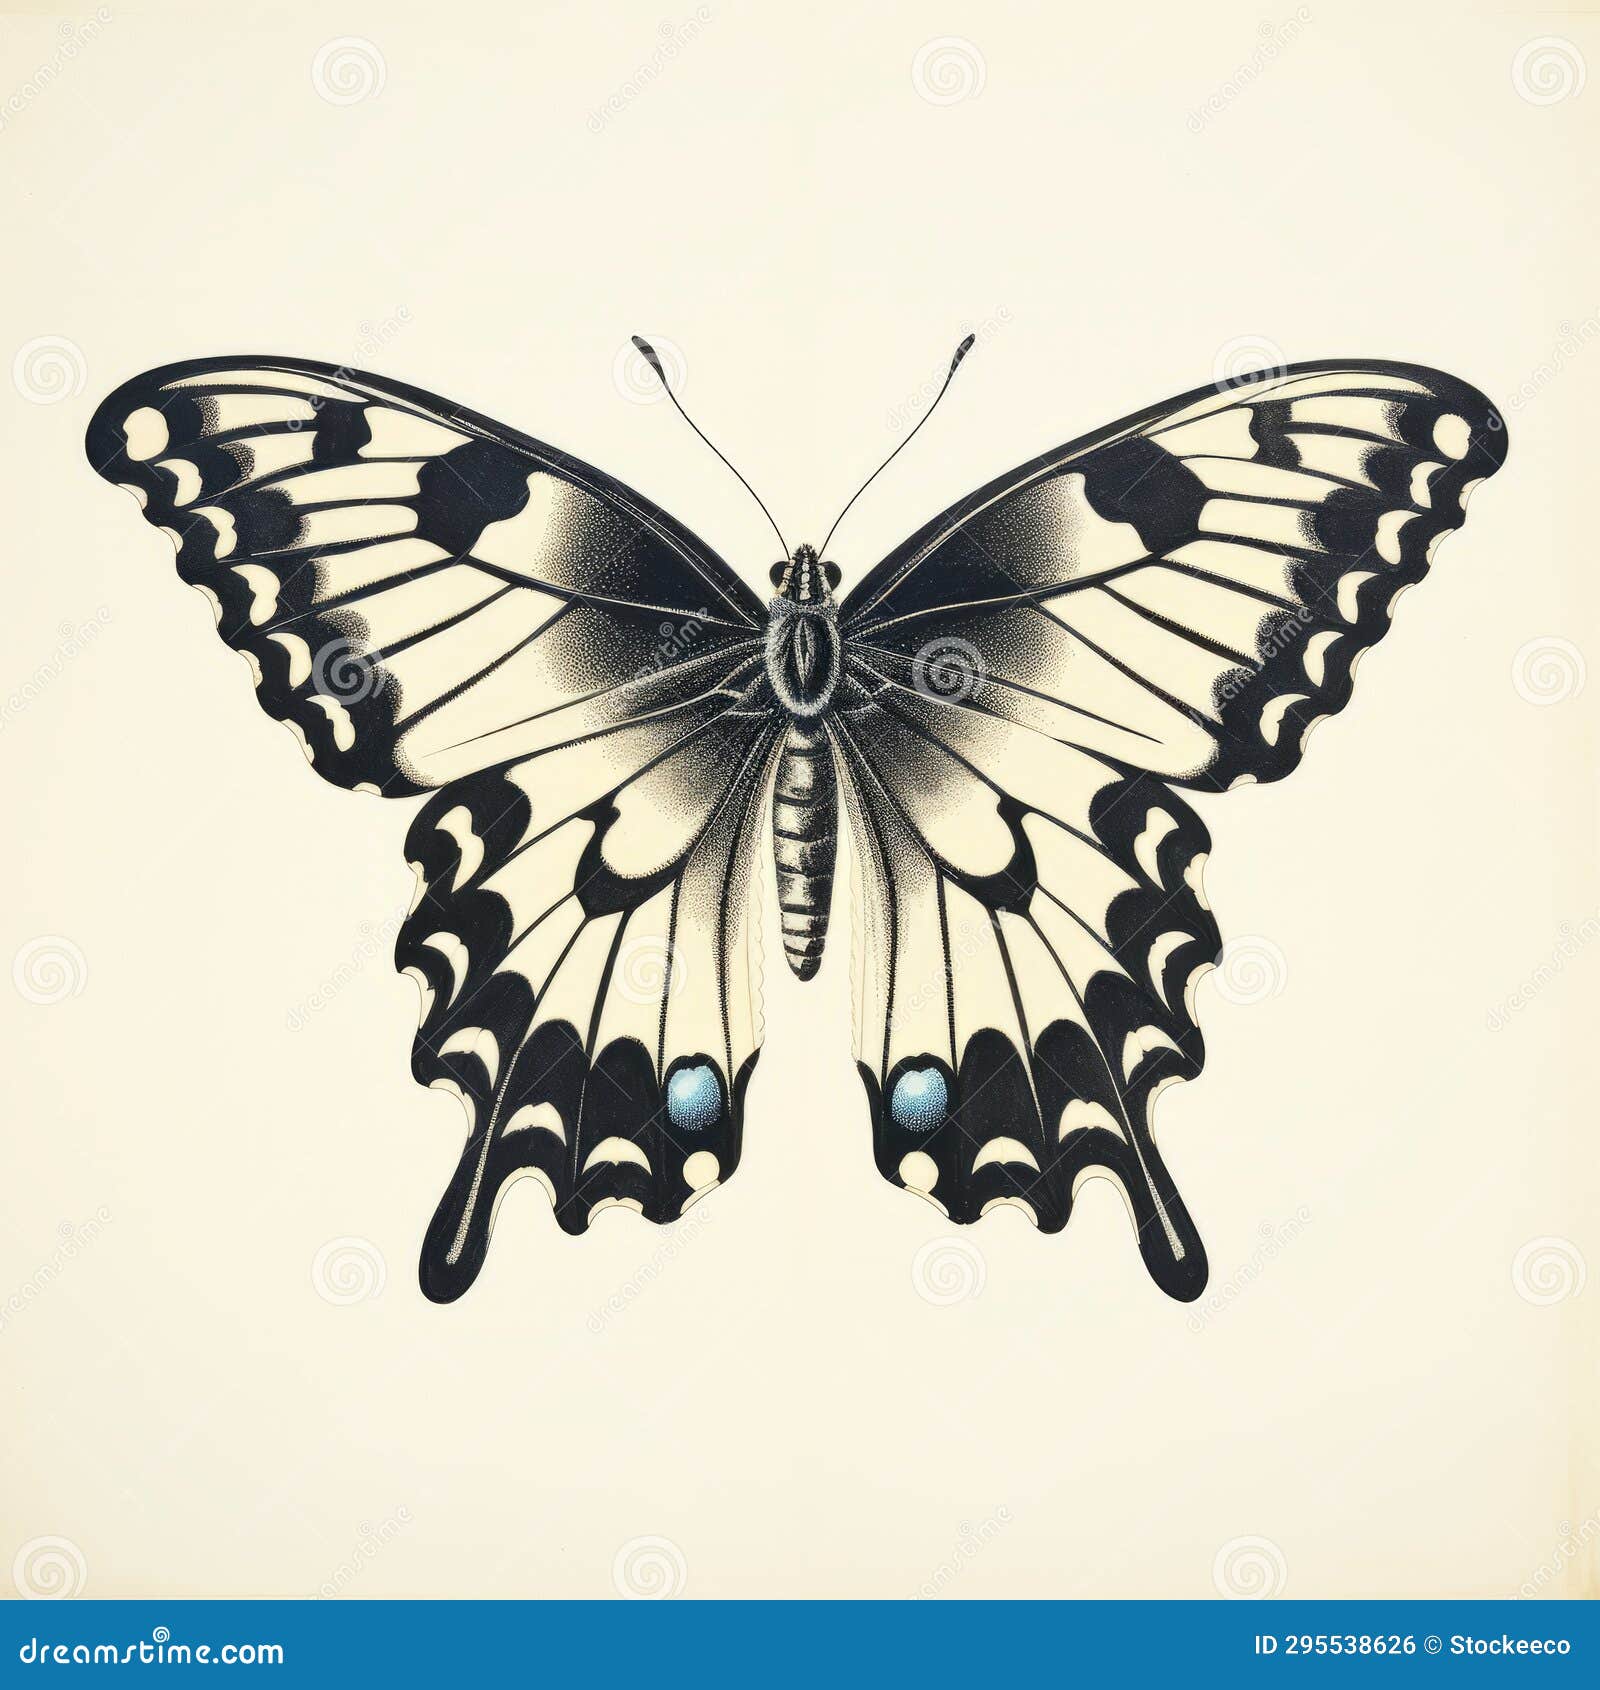 Vintage Gothic Butterfly Illustration on White Background Stock ...